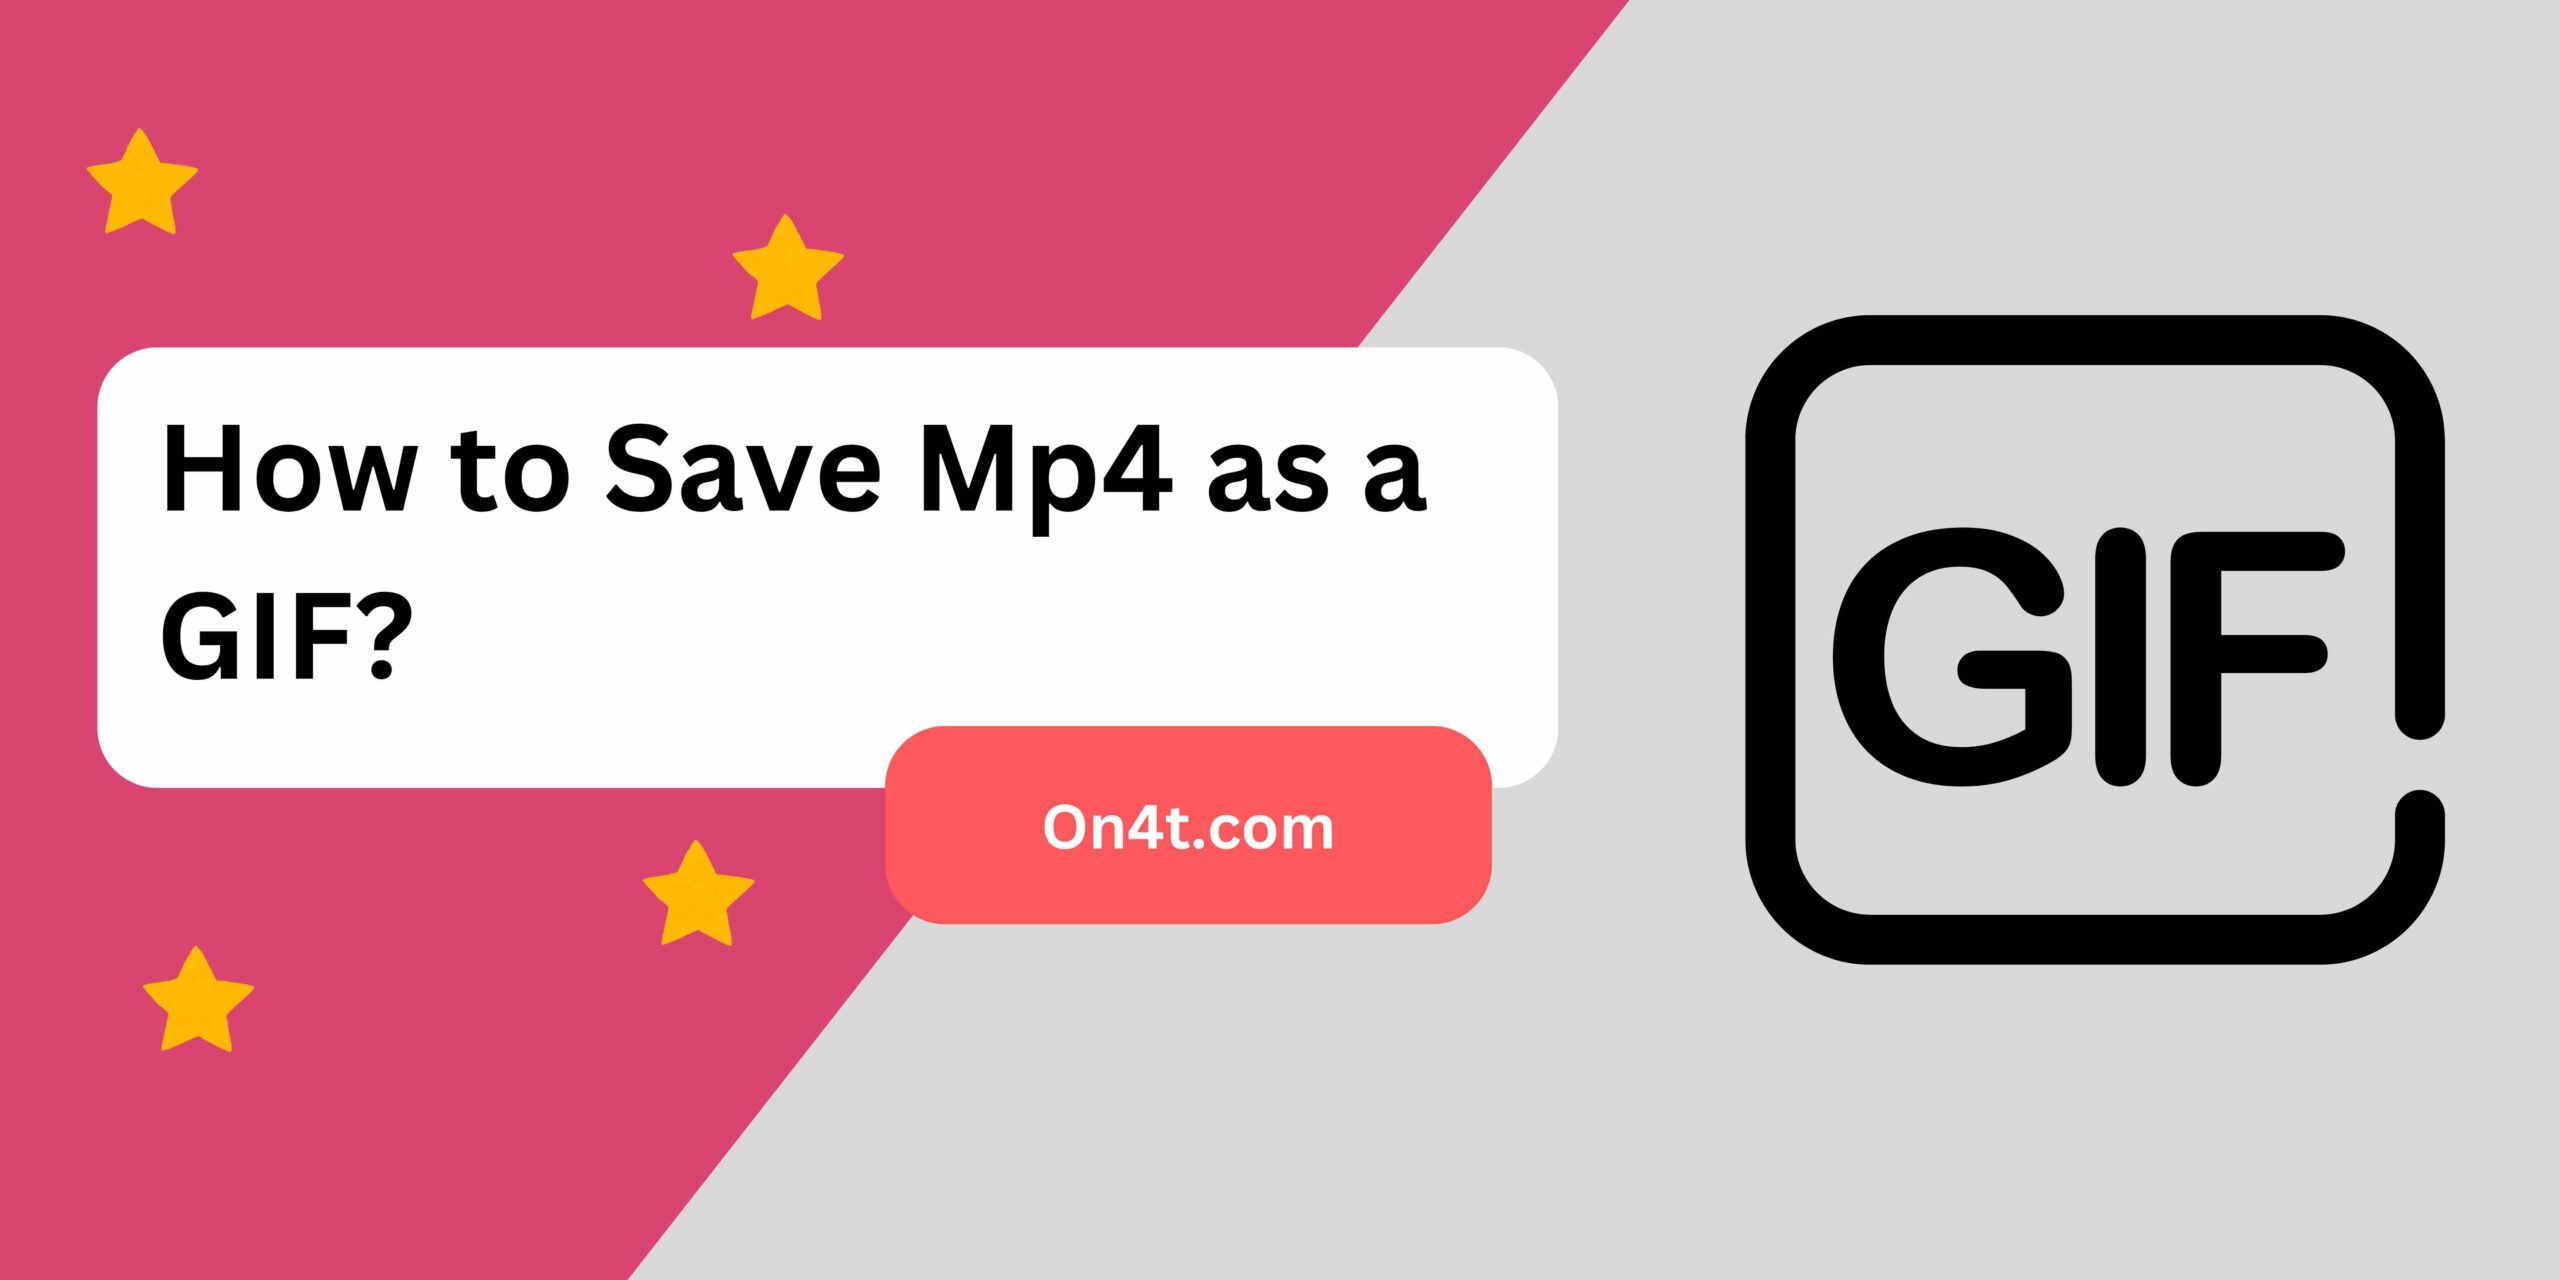 How to Save Mp4 as a GIF?